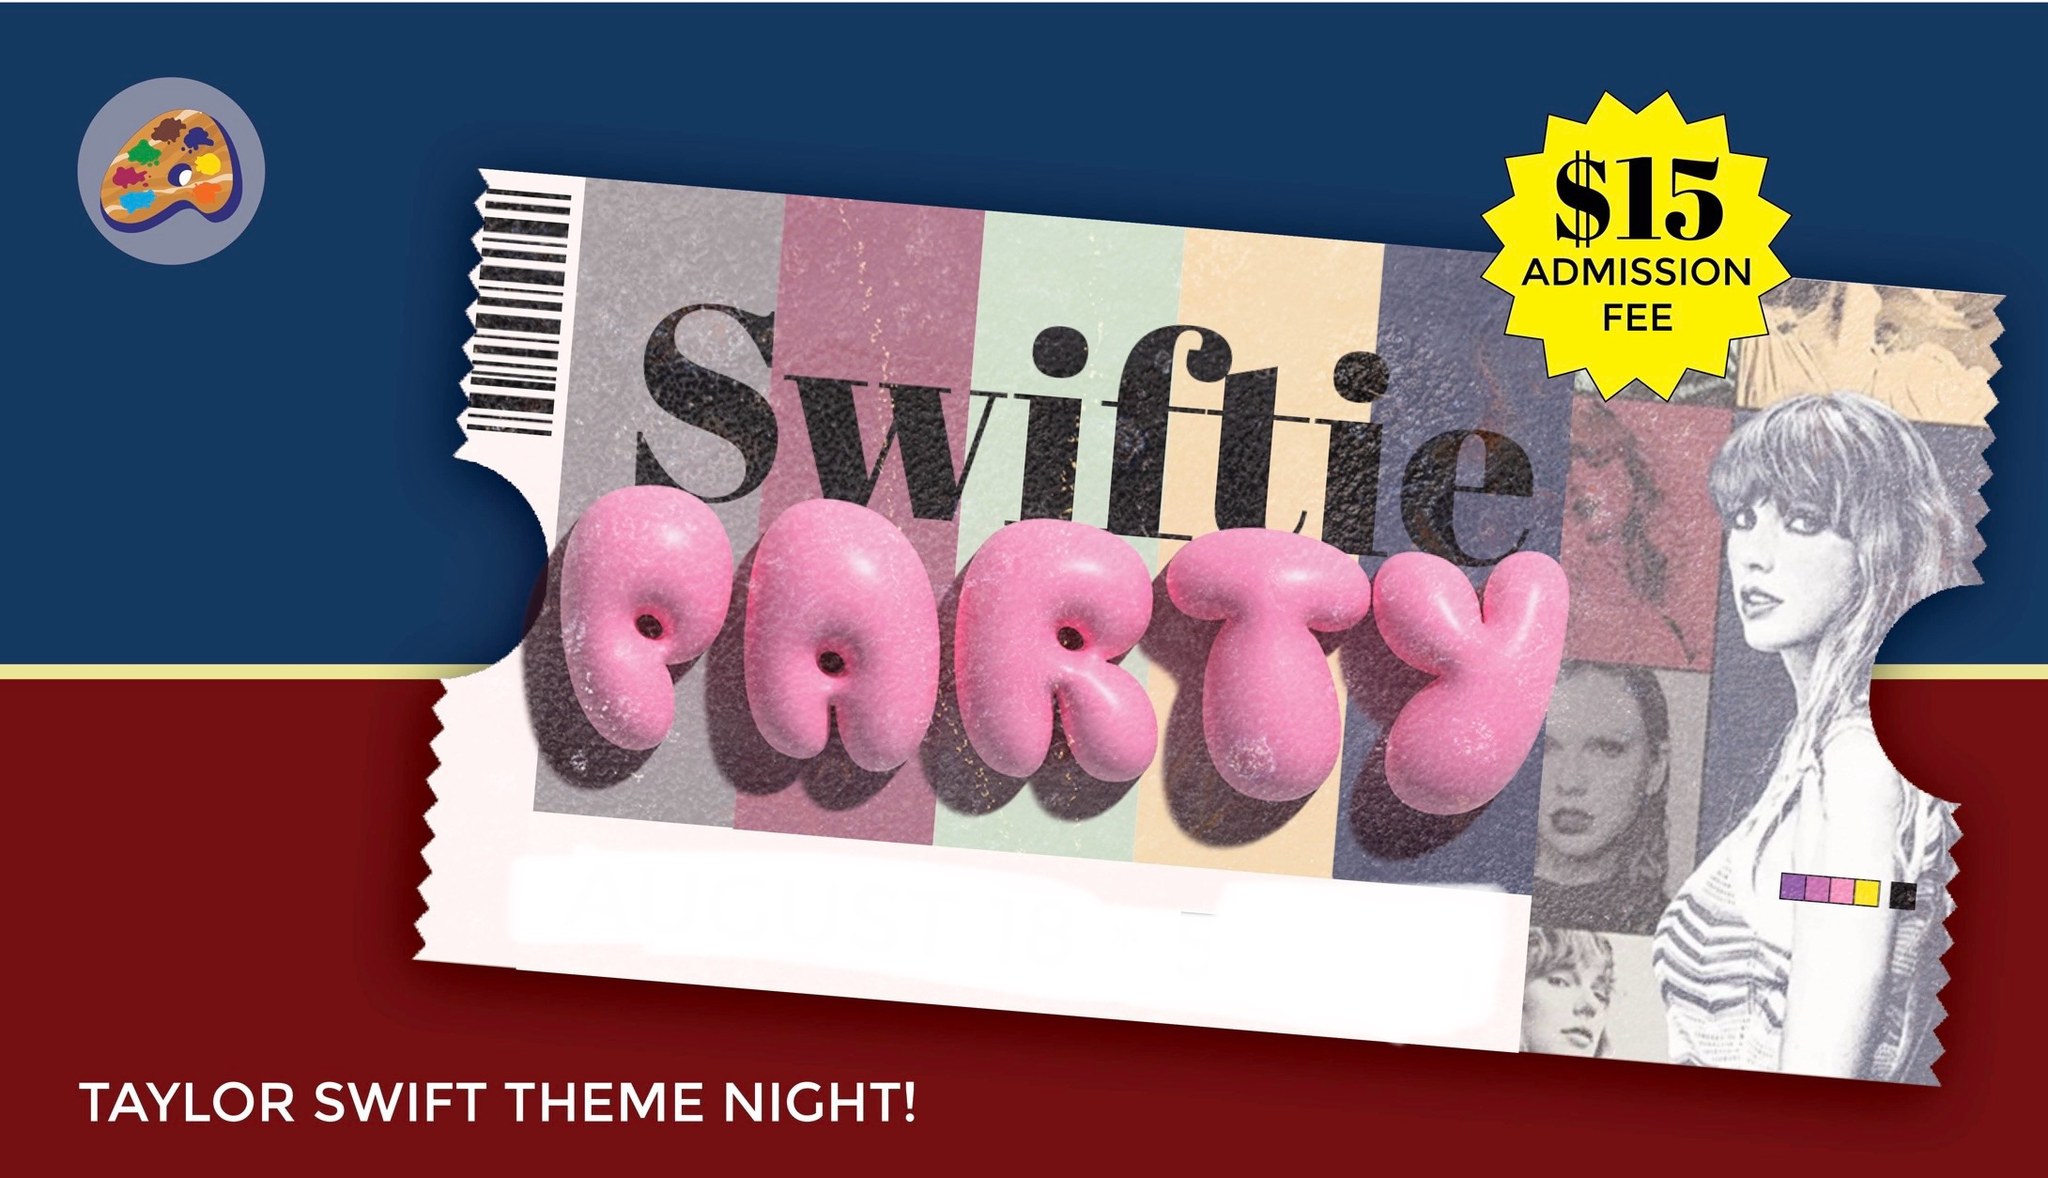 Swiftie Party - all ages & fans welcome to party like it’s 1989